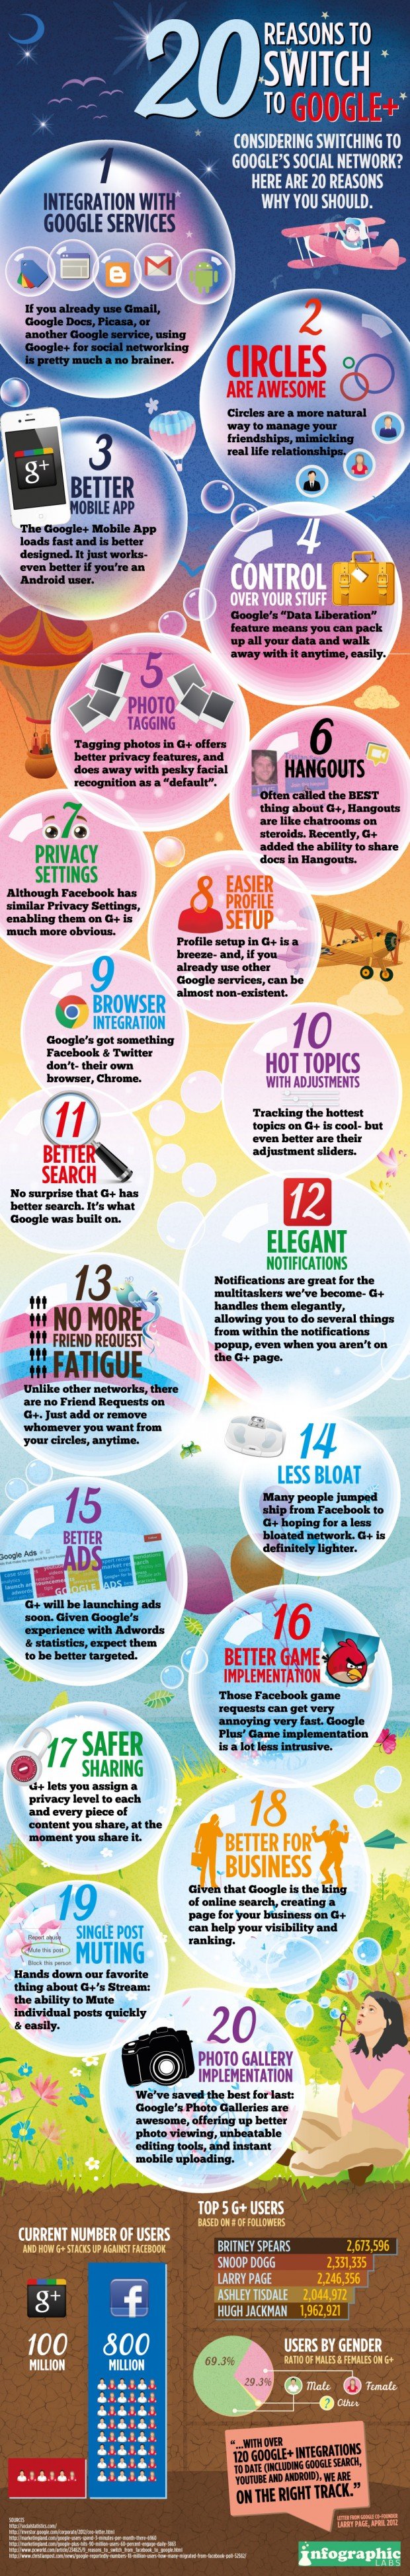 Are These 20 Reasons Enough to Switch to Google+?